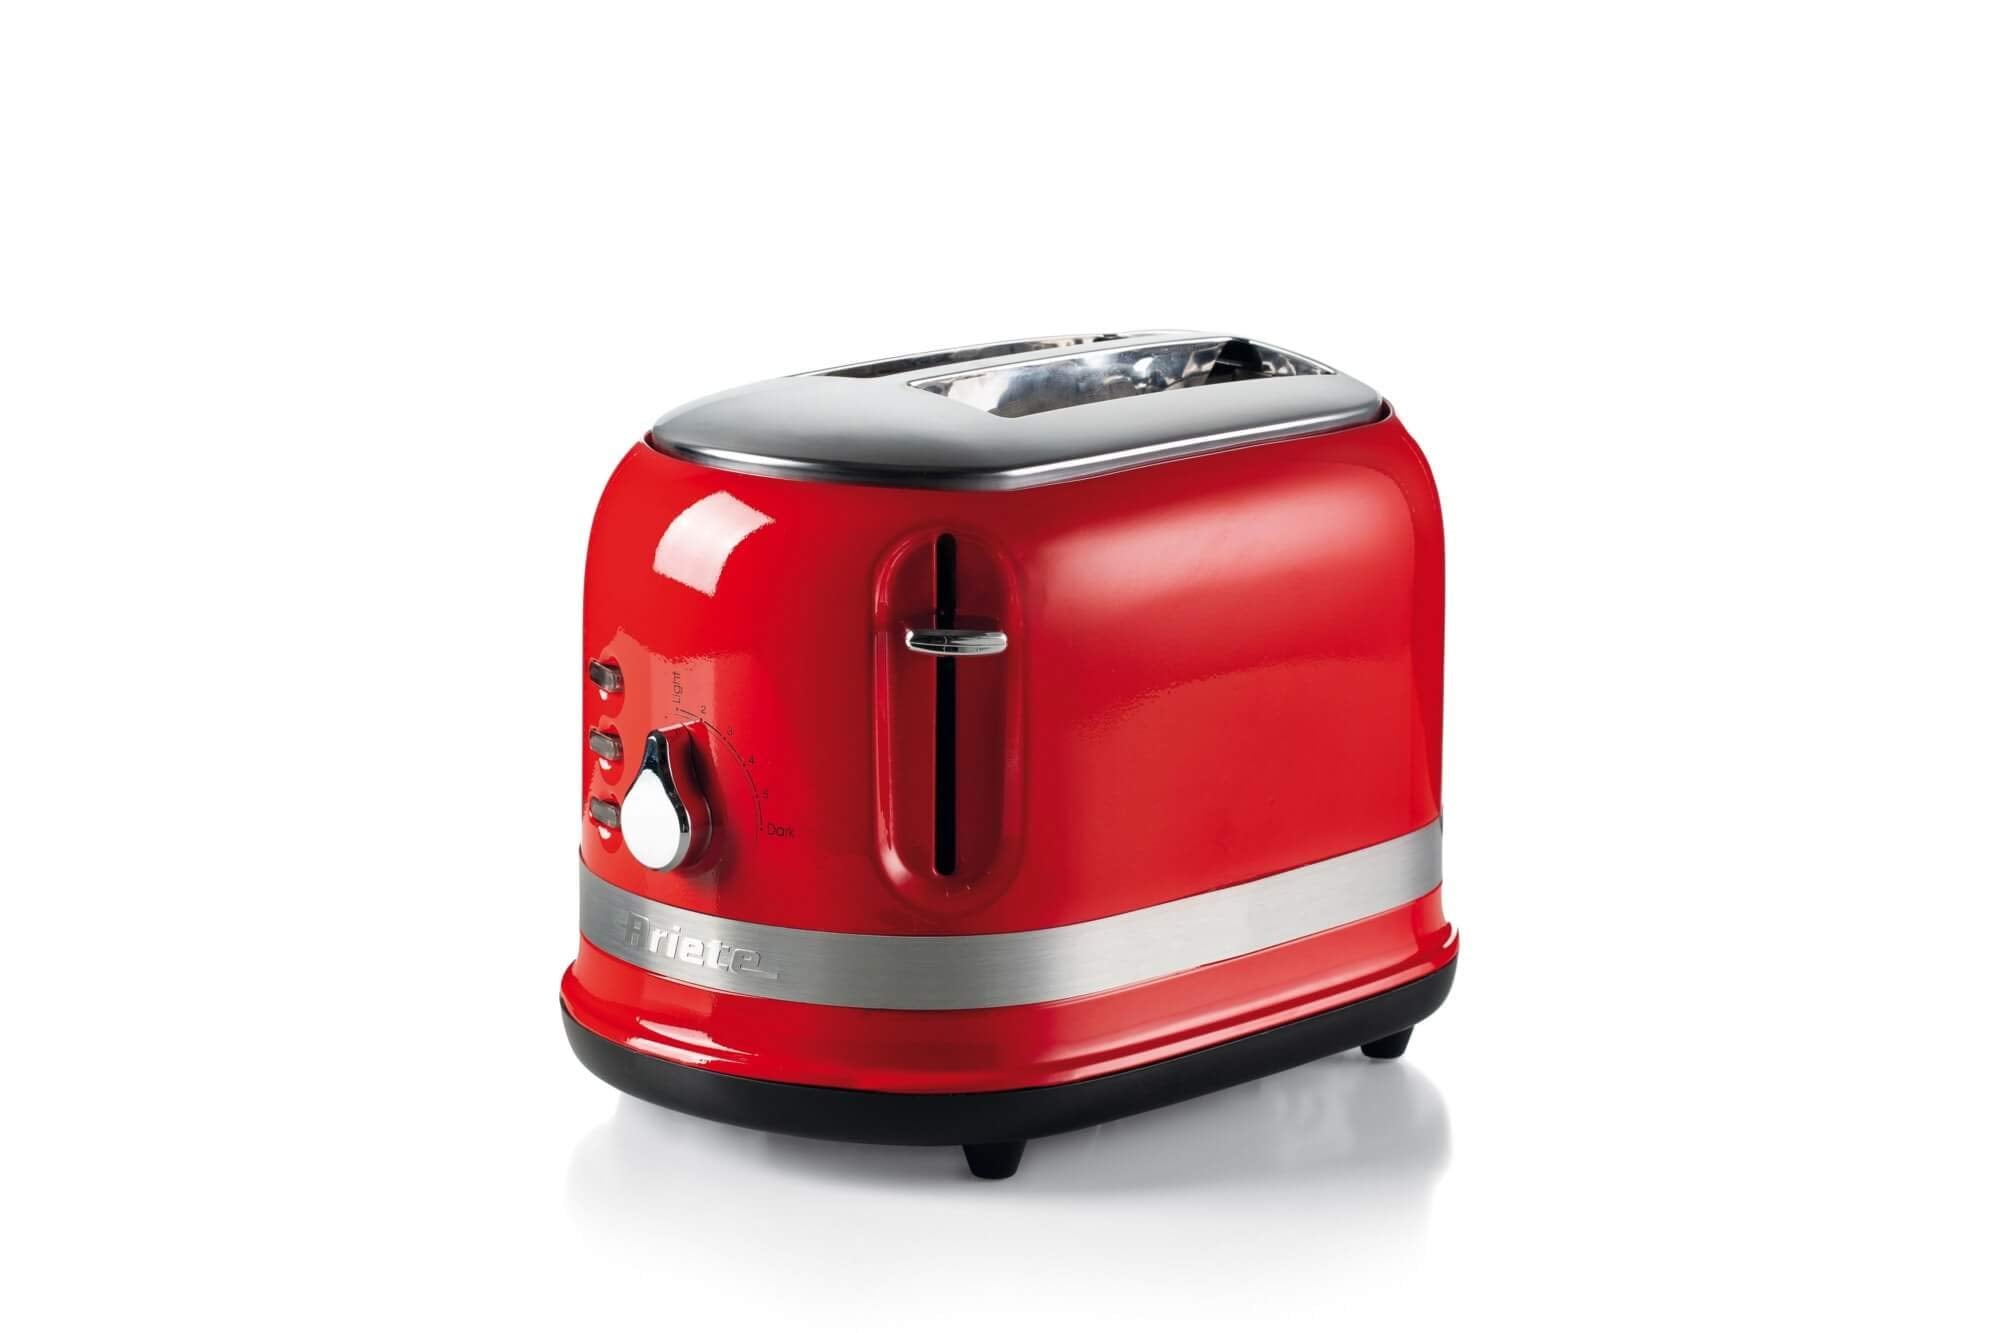 Ariete Moderna 2 Slice Toaster with Sandwich Cages, 800W, Auto Eject, Crumb Tray, Defrosting and Reheating Functions اريتي محمصة خبز من قطعتين مع اقفاص ساندويتش من موديرنا، 800 واط